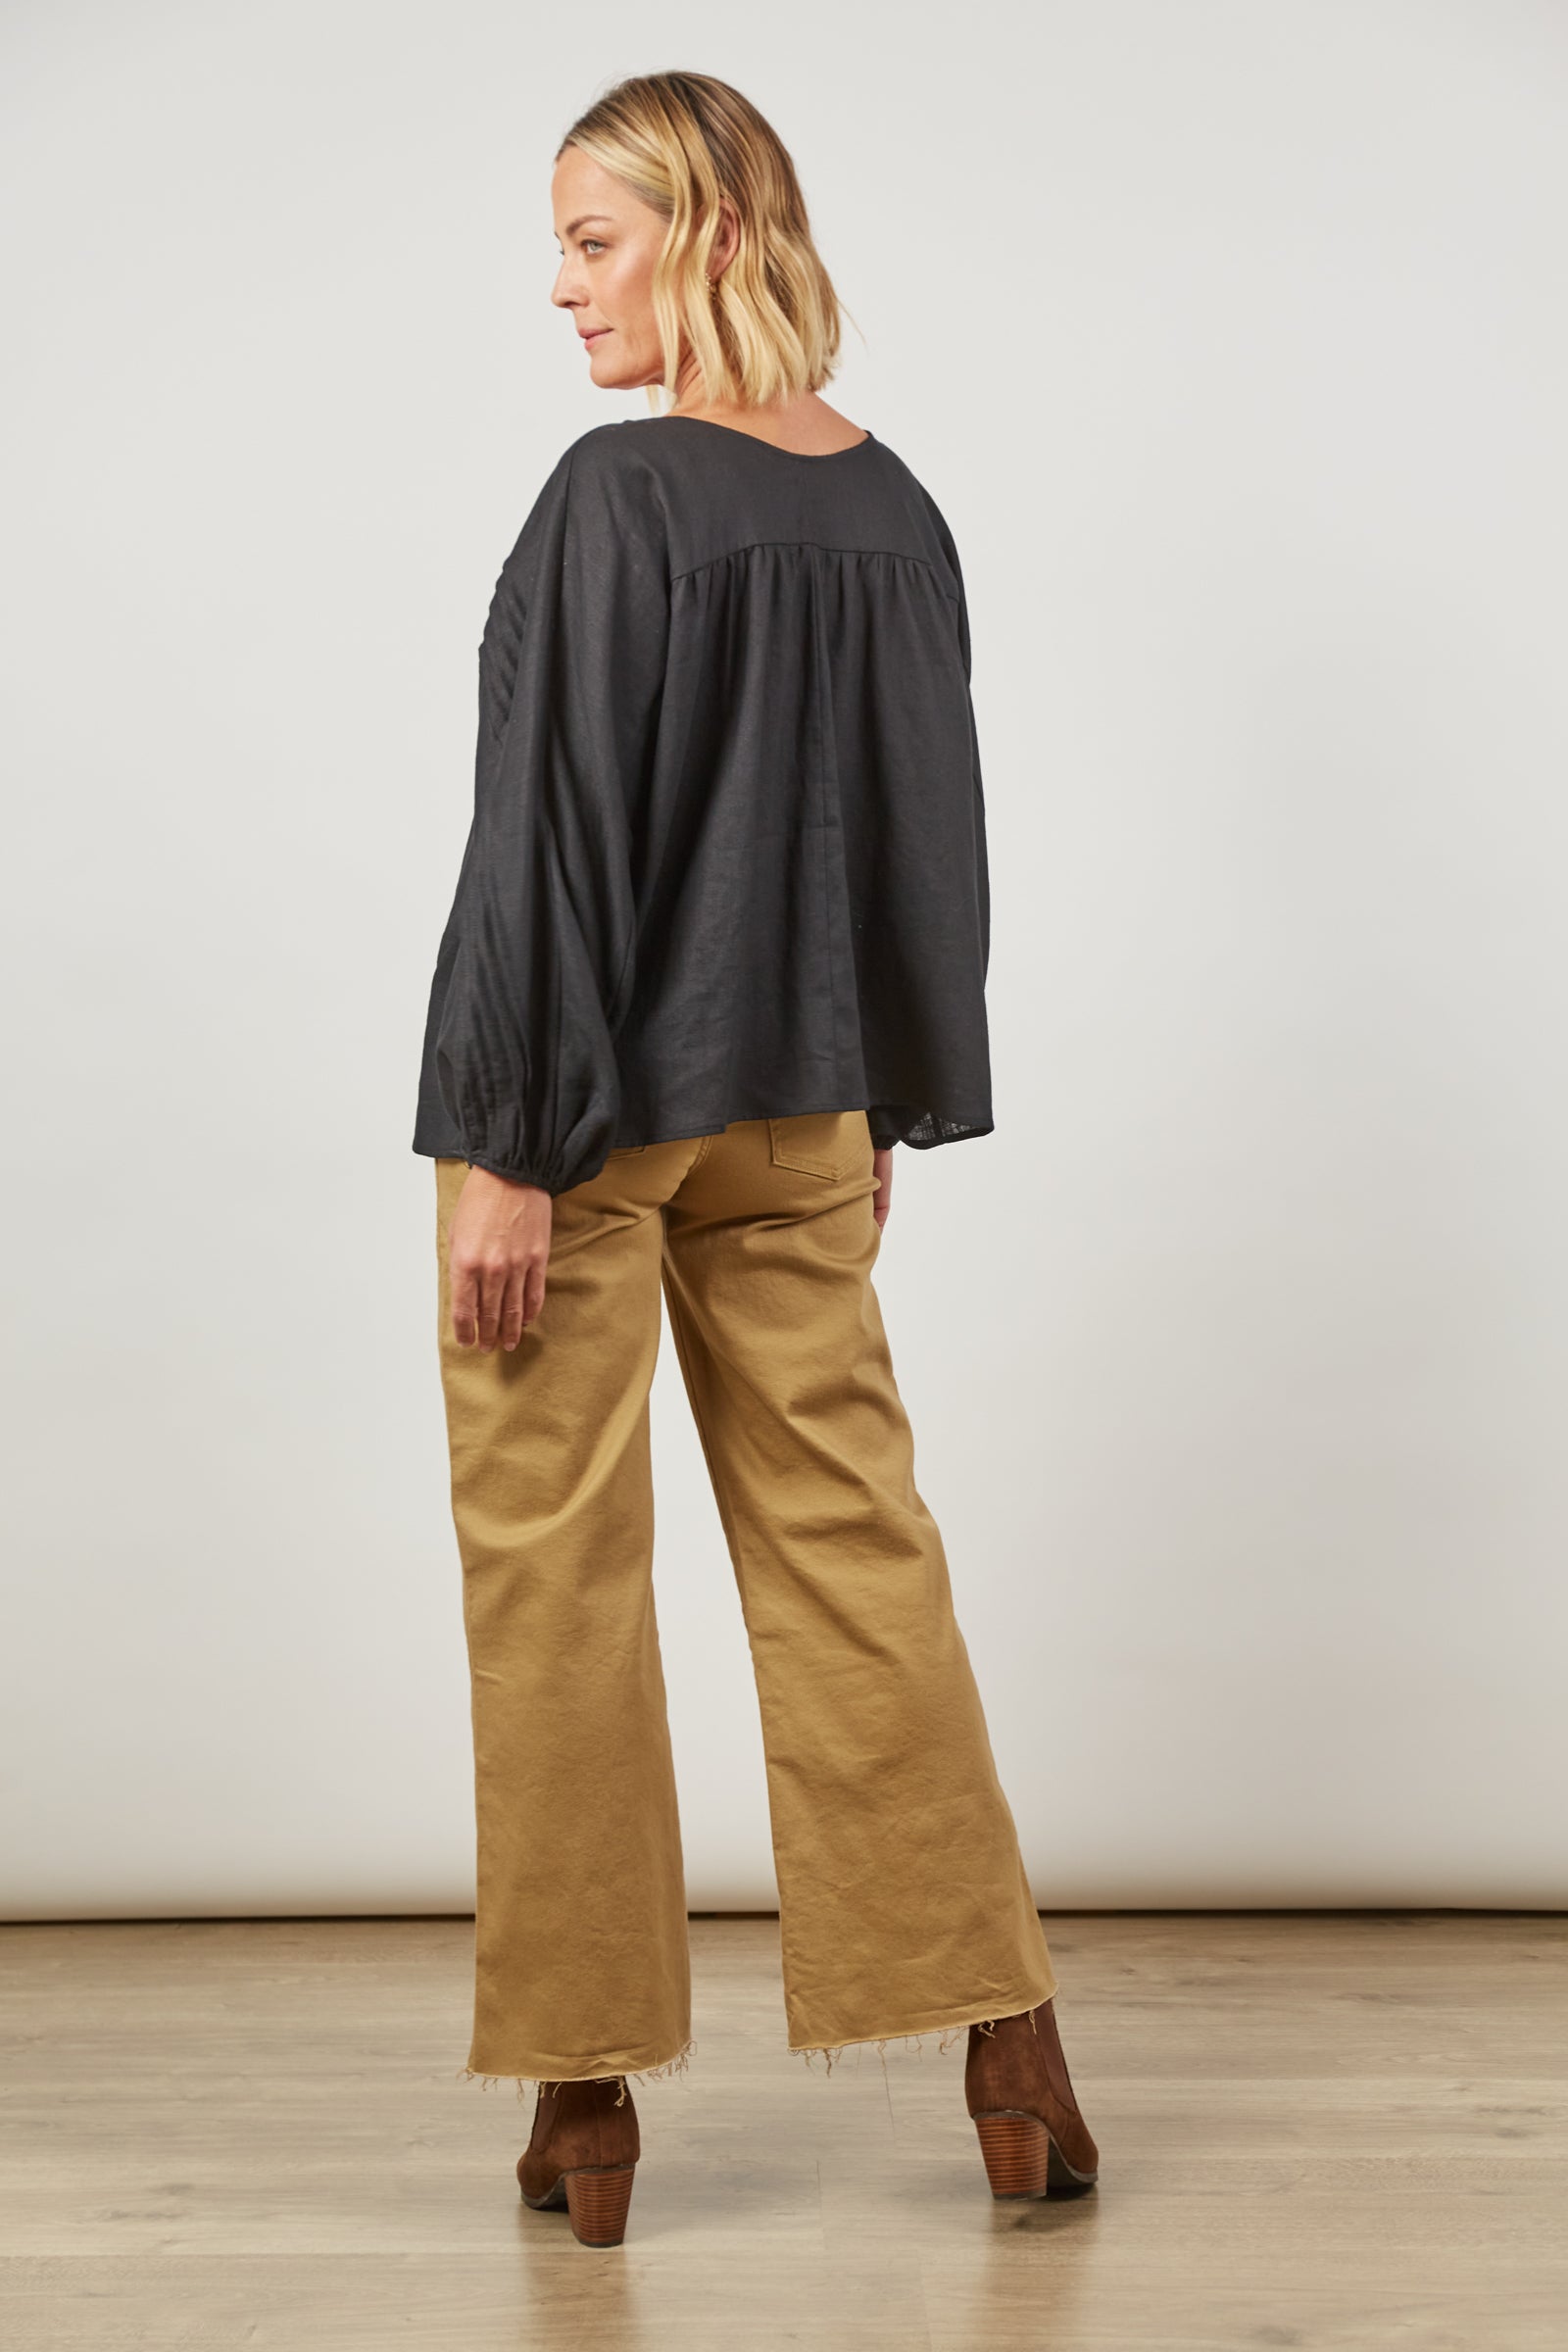 Panorama Tuck Blouse - Onyx - Isle of Mine Clothing - Top L/S Linen